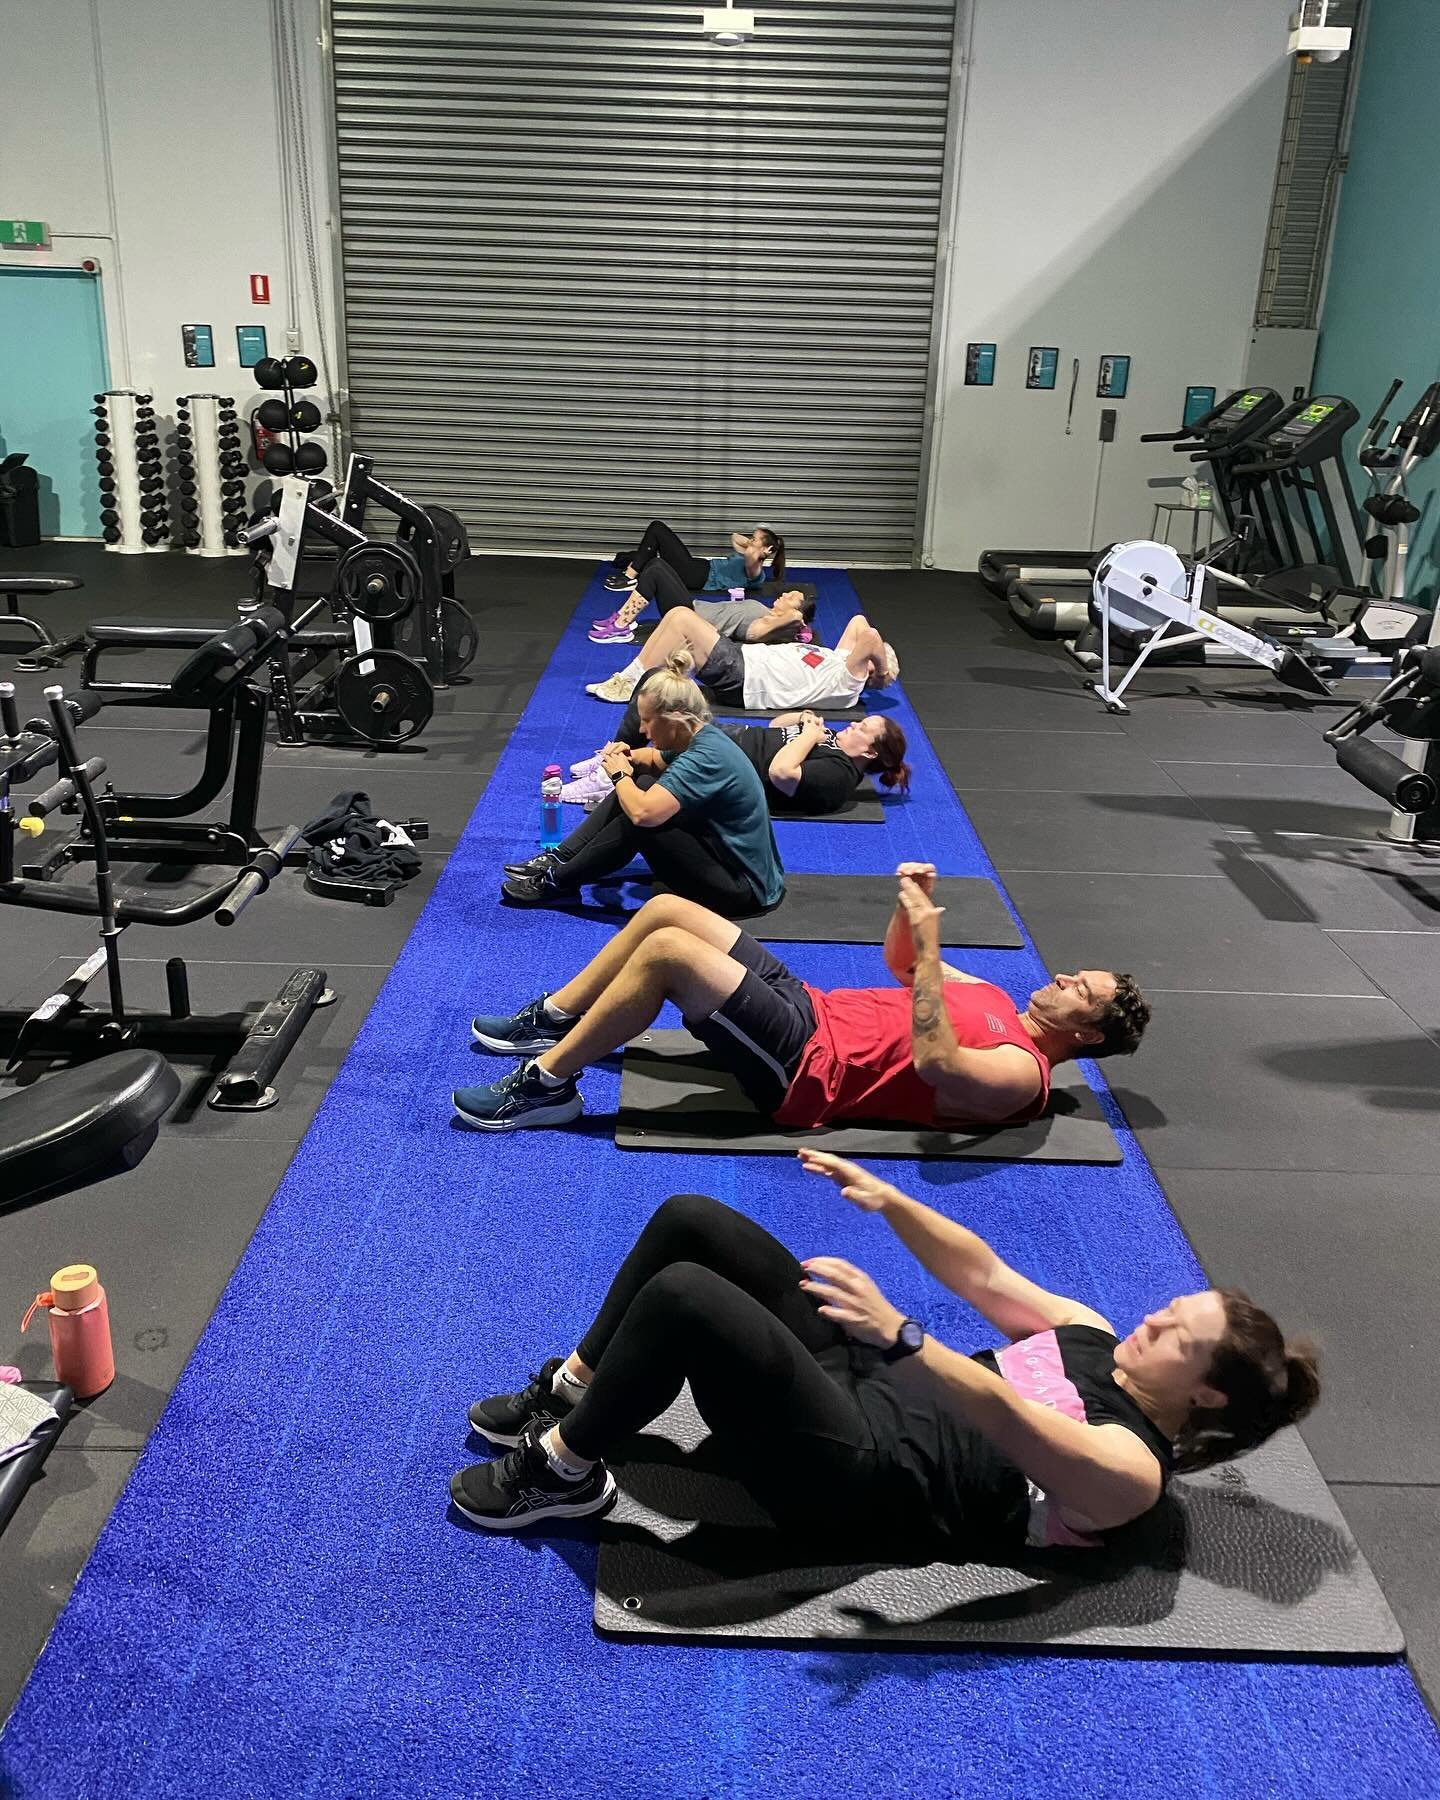 Did you know that we run 45 minute strength and conditioning classes every Tuesday and Thursday at 6am and 6pm. These are complimentary and including on all membership types. There's no booking required, just rock up 5 minutes before and join in 🏋🏼